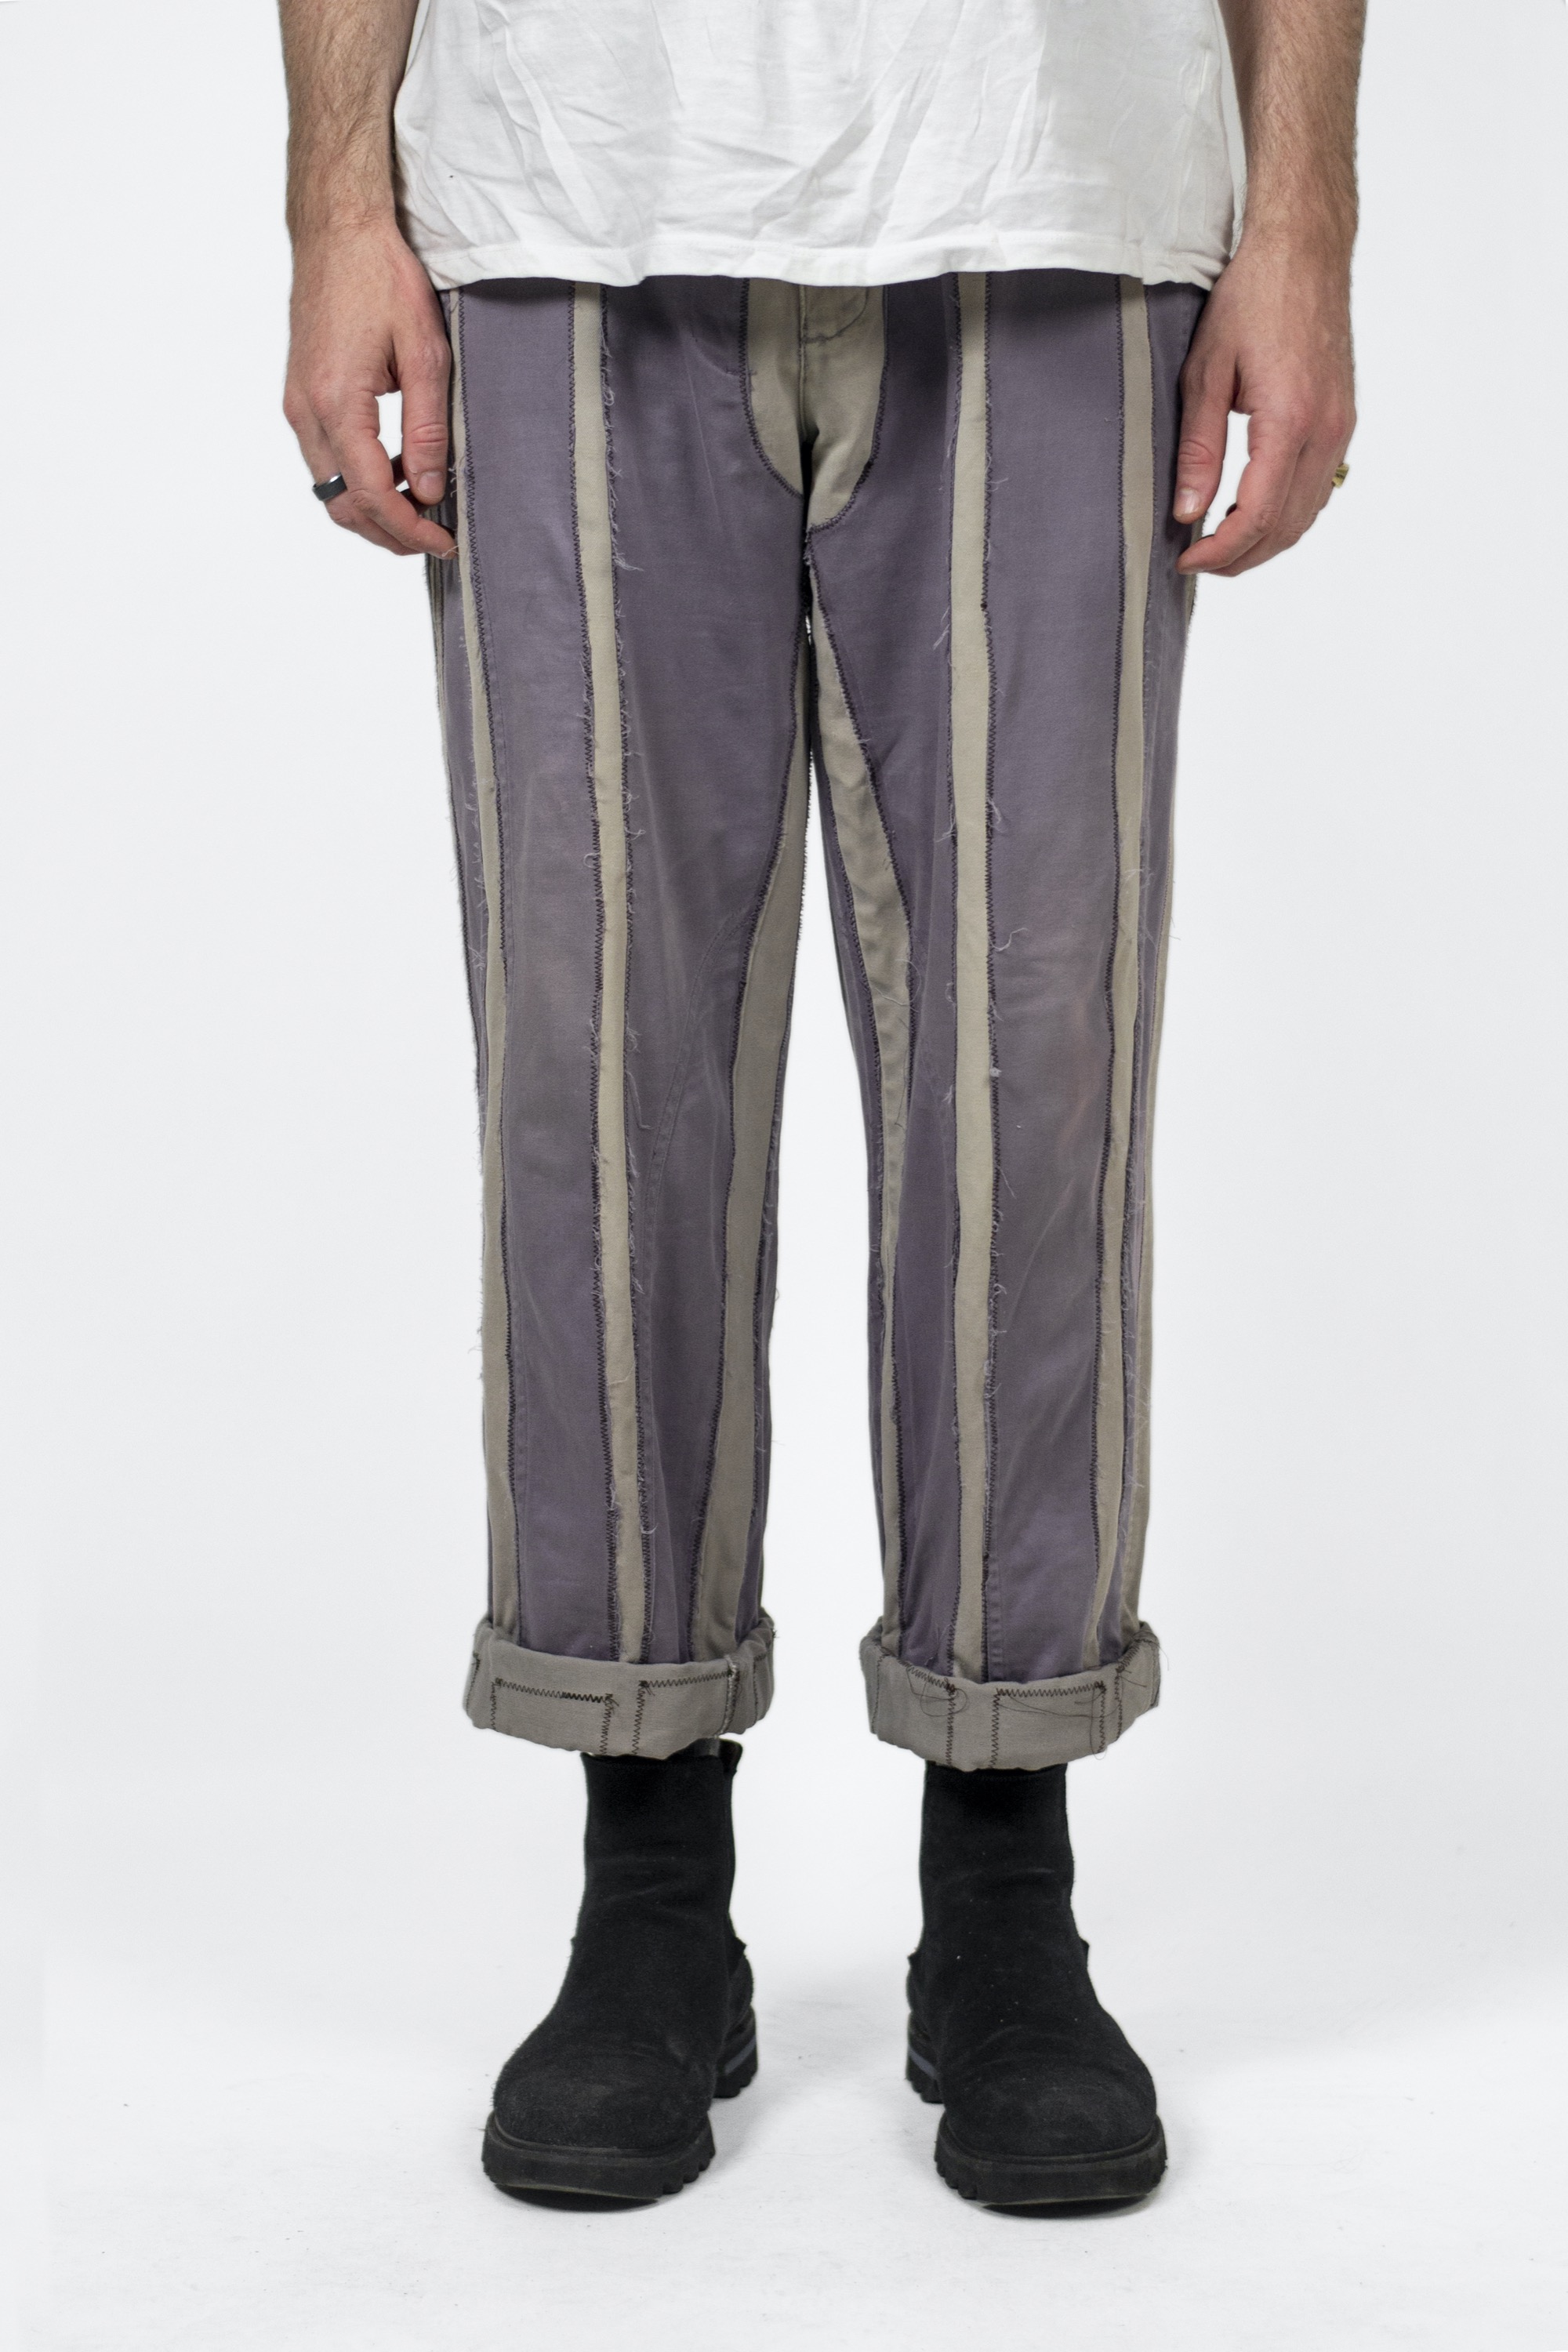 A model wearing repaired pants